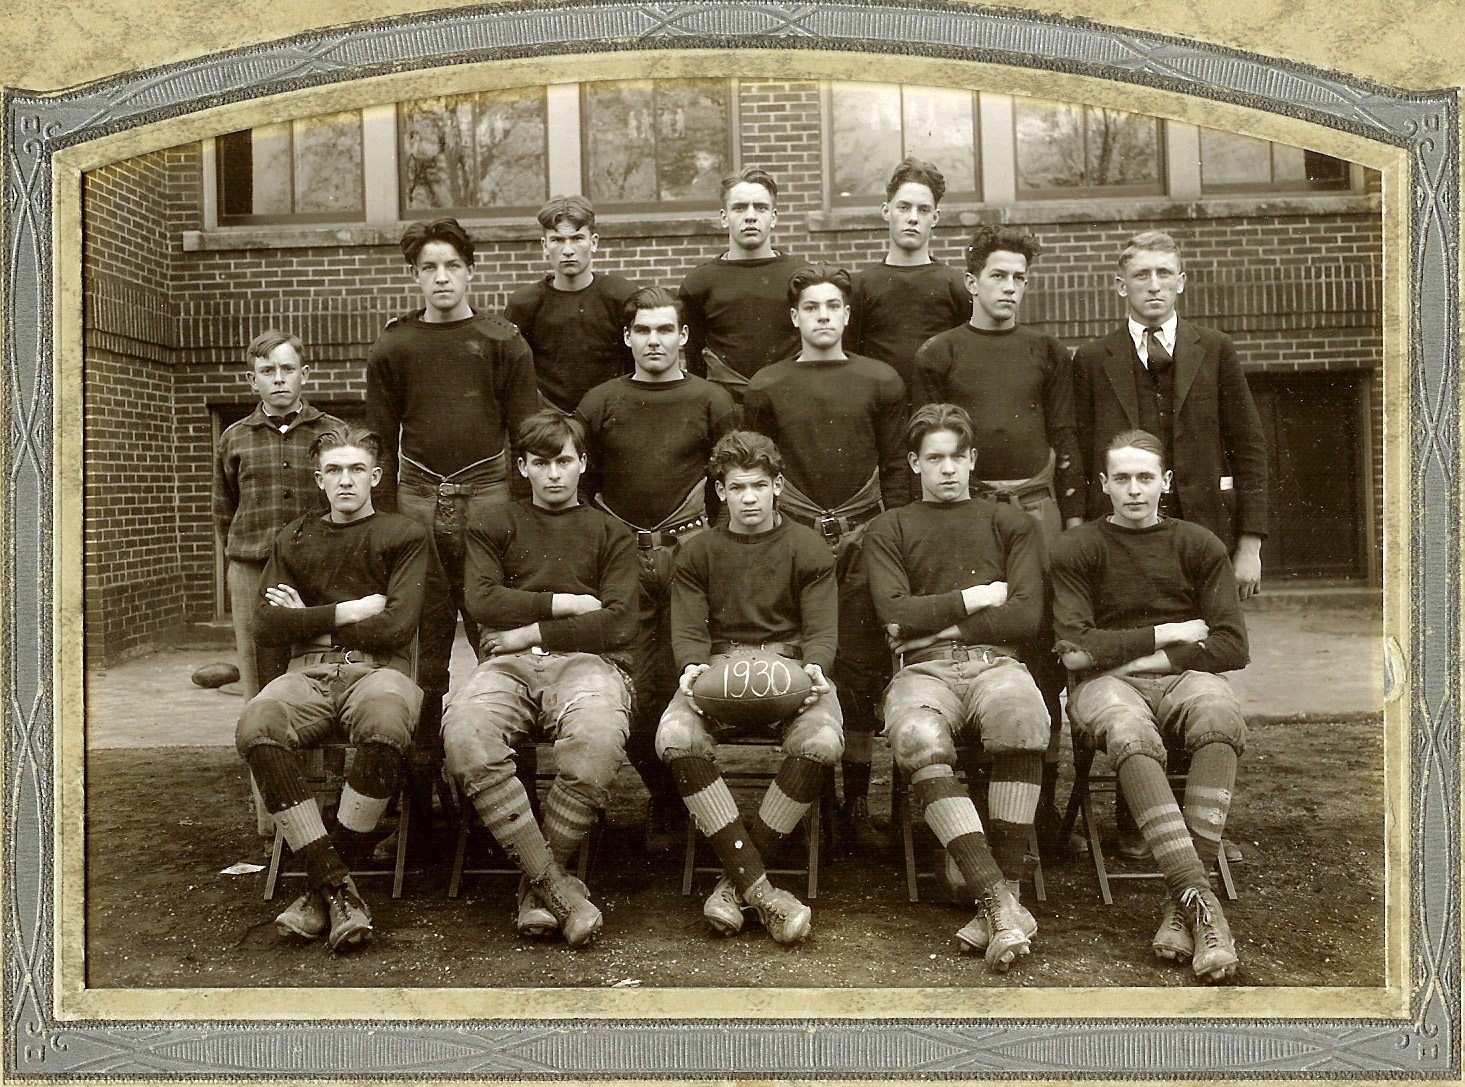 1930 Rootstown High School football Portage Sports